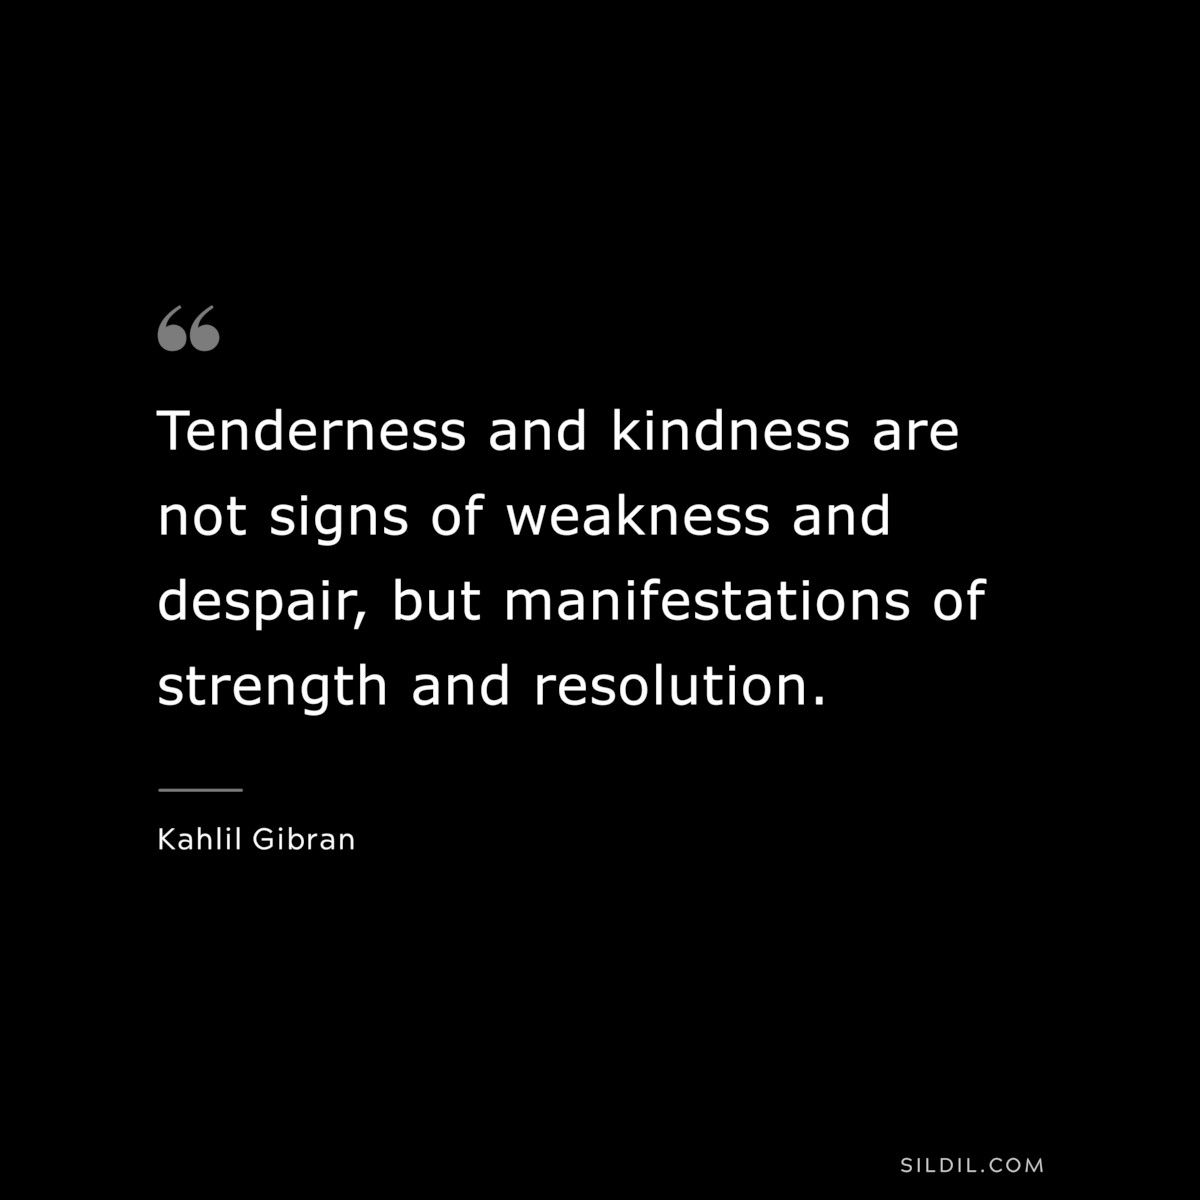 Tenderness and kindness are not signs of weakness and despair, but manifestations of strength and resolution. ― Kahlil Gibran